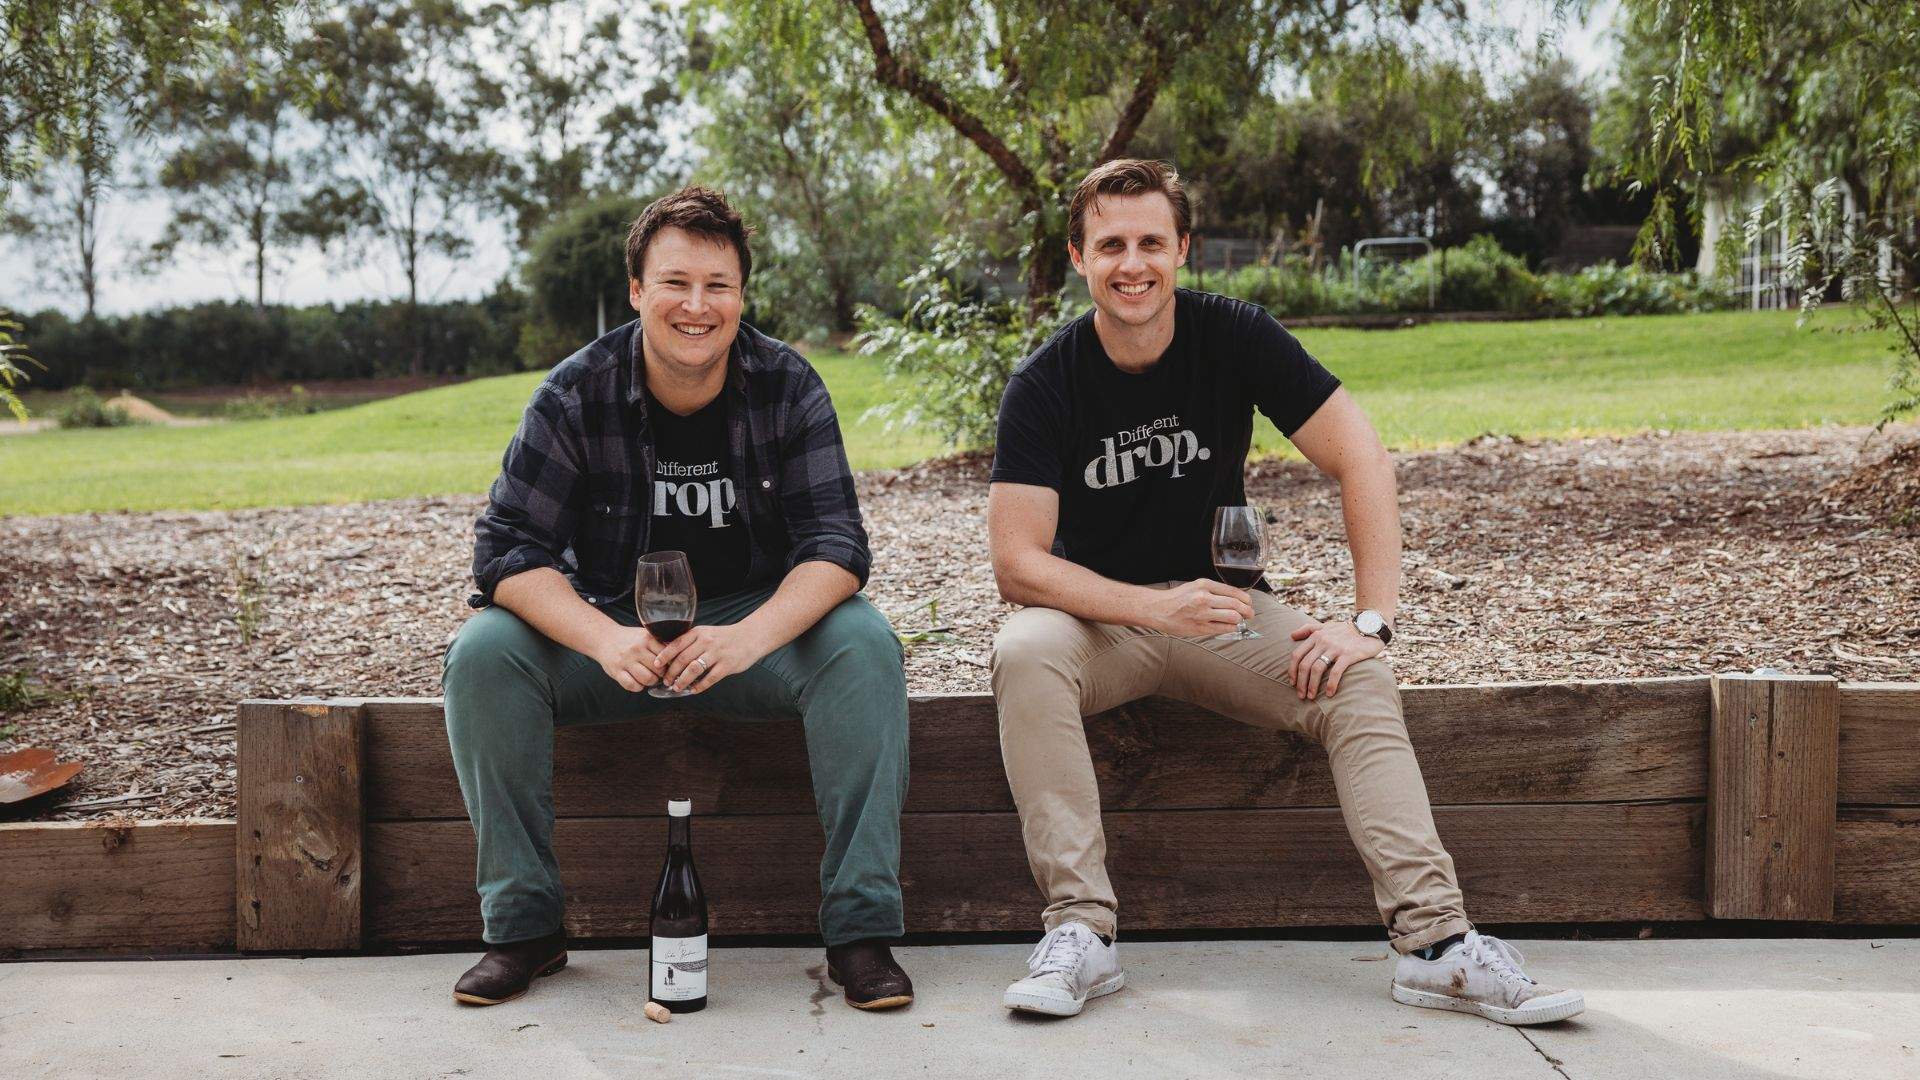 Online wine retailer 'Different Drop' co-founders Tom Hollings (left) and Brett Ketelbey (right).